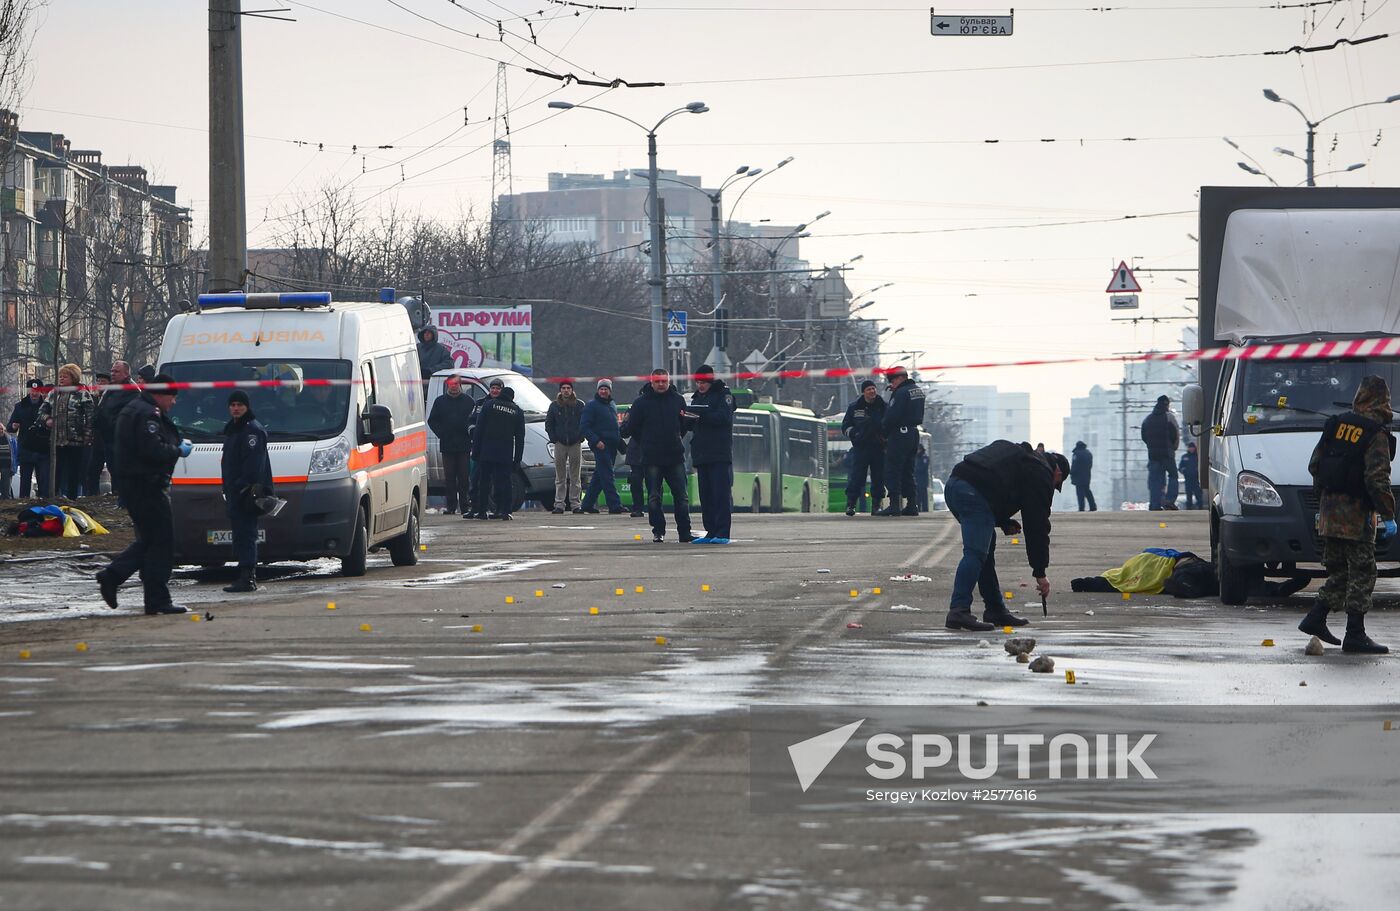 2 killed in explosion at rally in Kharkiv